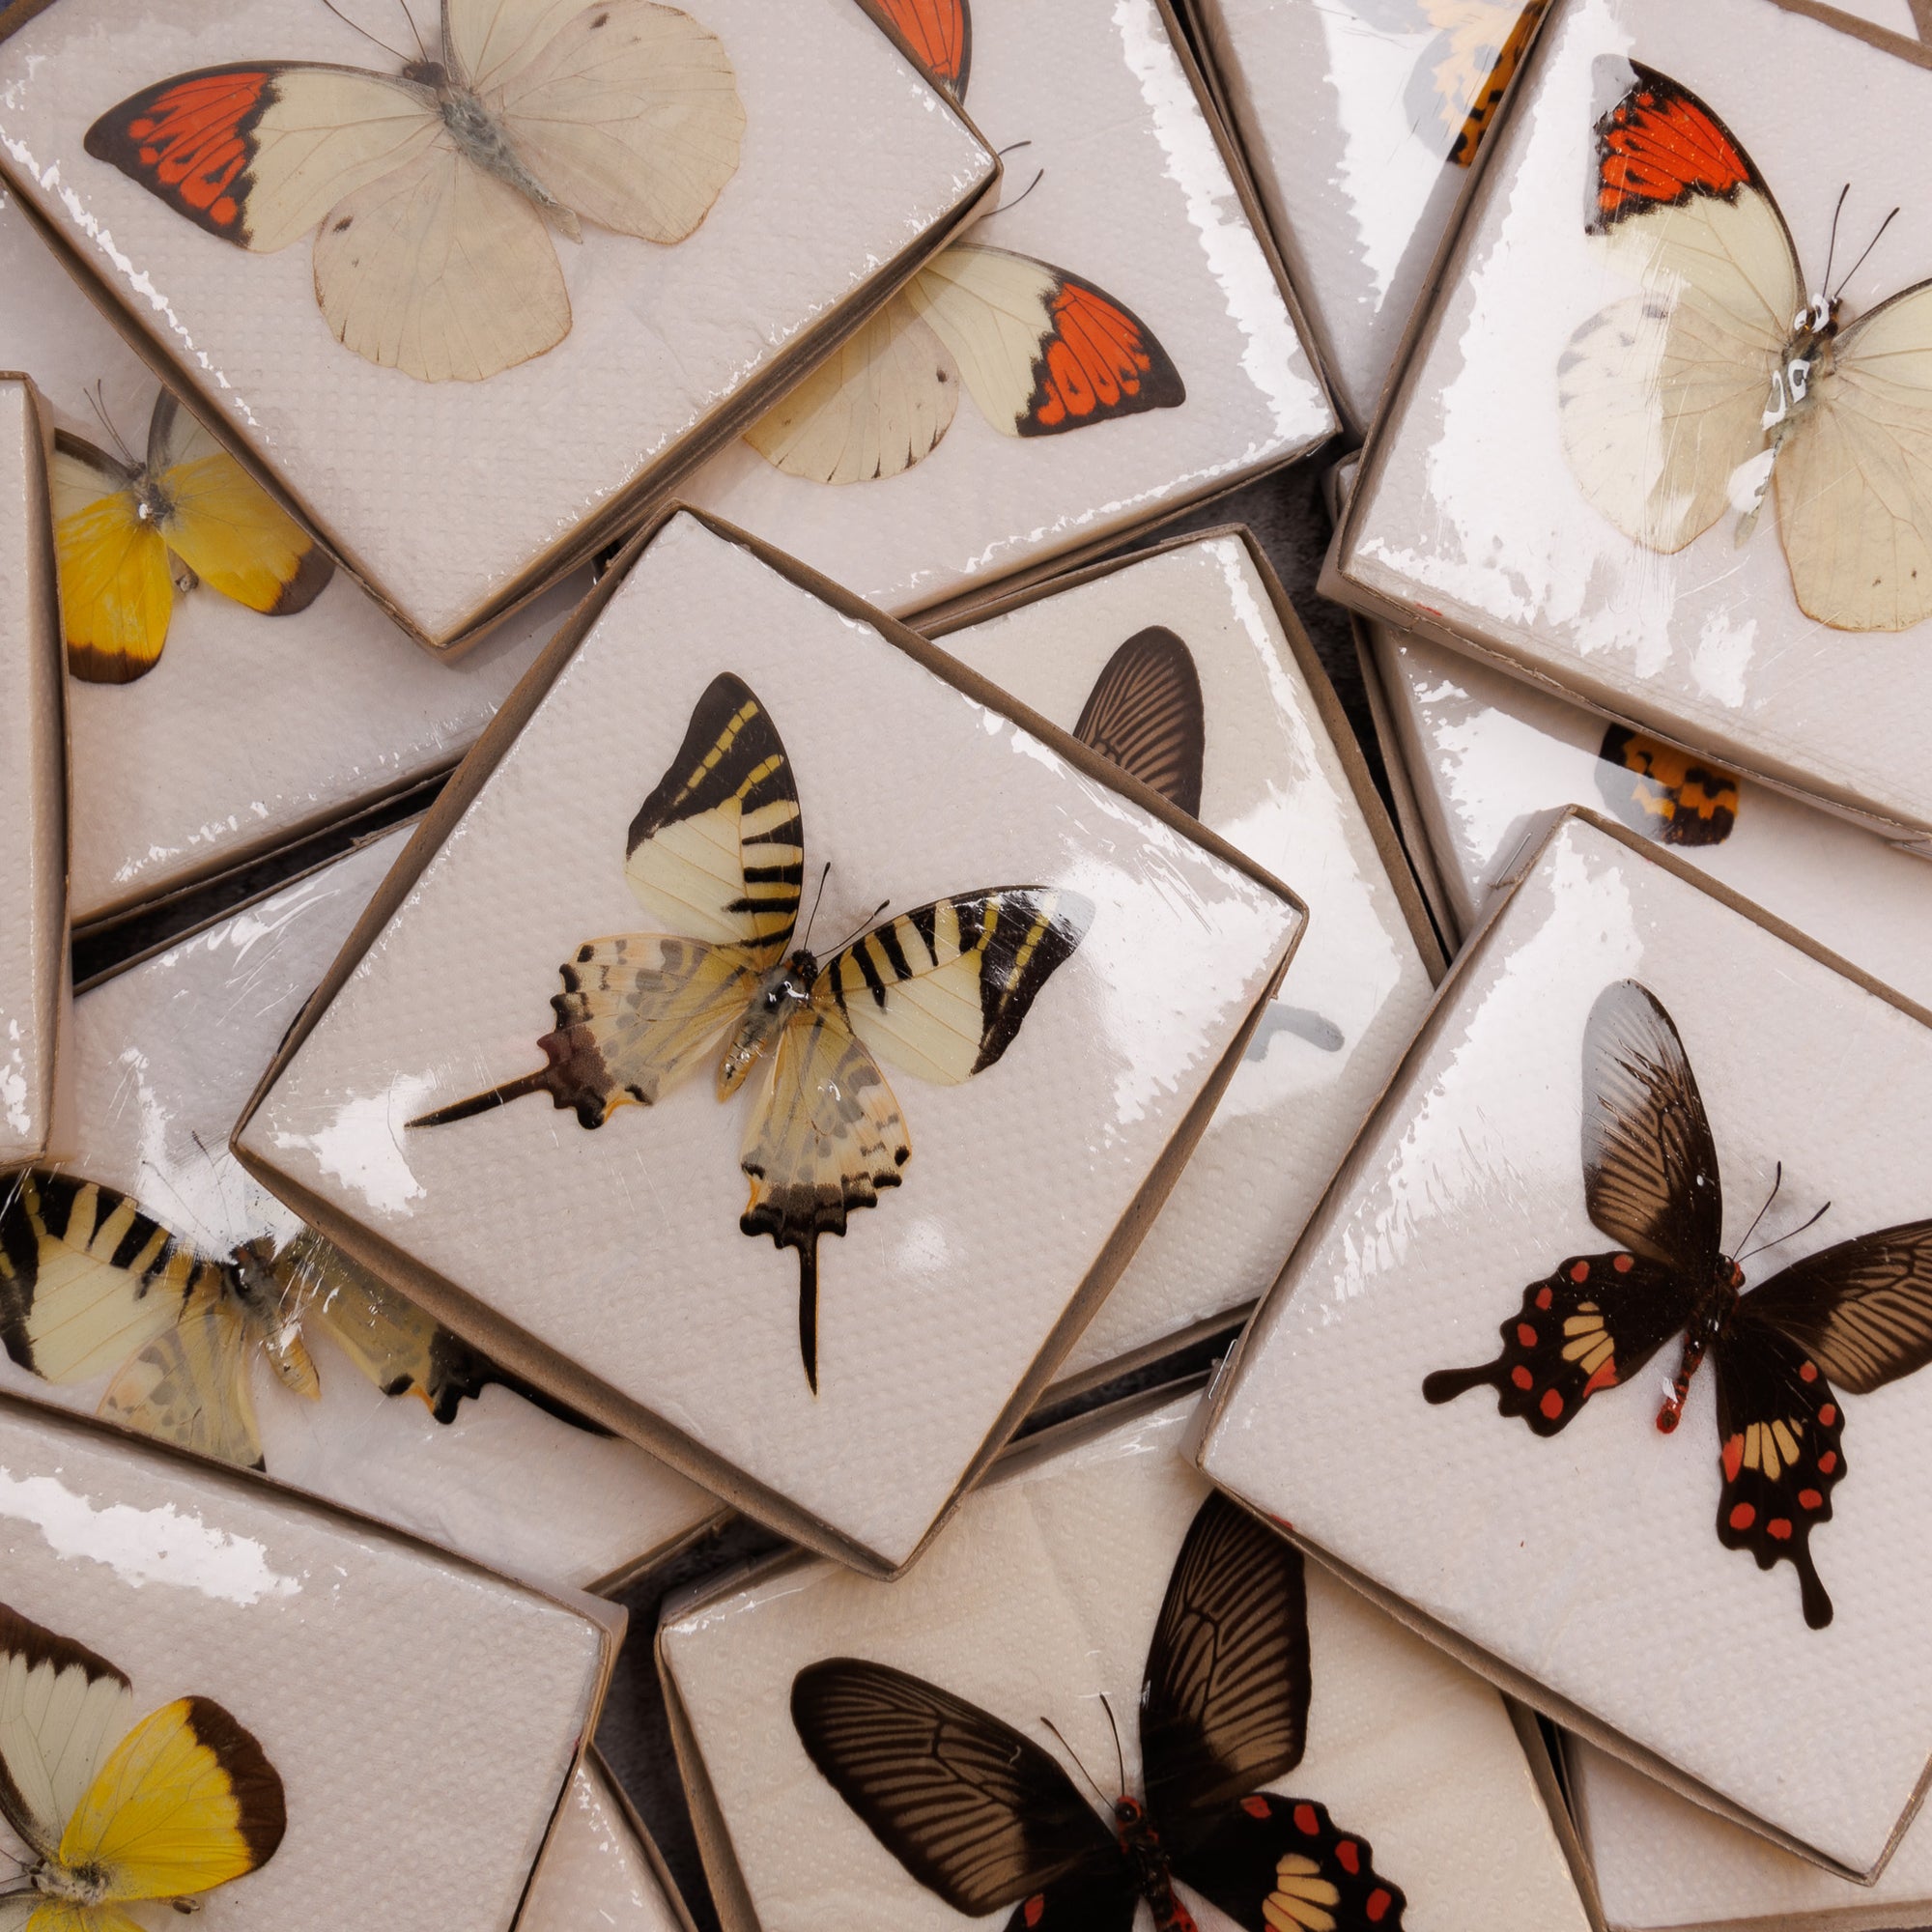 Dired Butterflies A1 Dry-preserved Real Butterfly Specimens WINGS SPREAD, Pack of 2,5,10,25